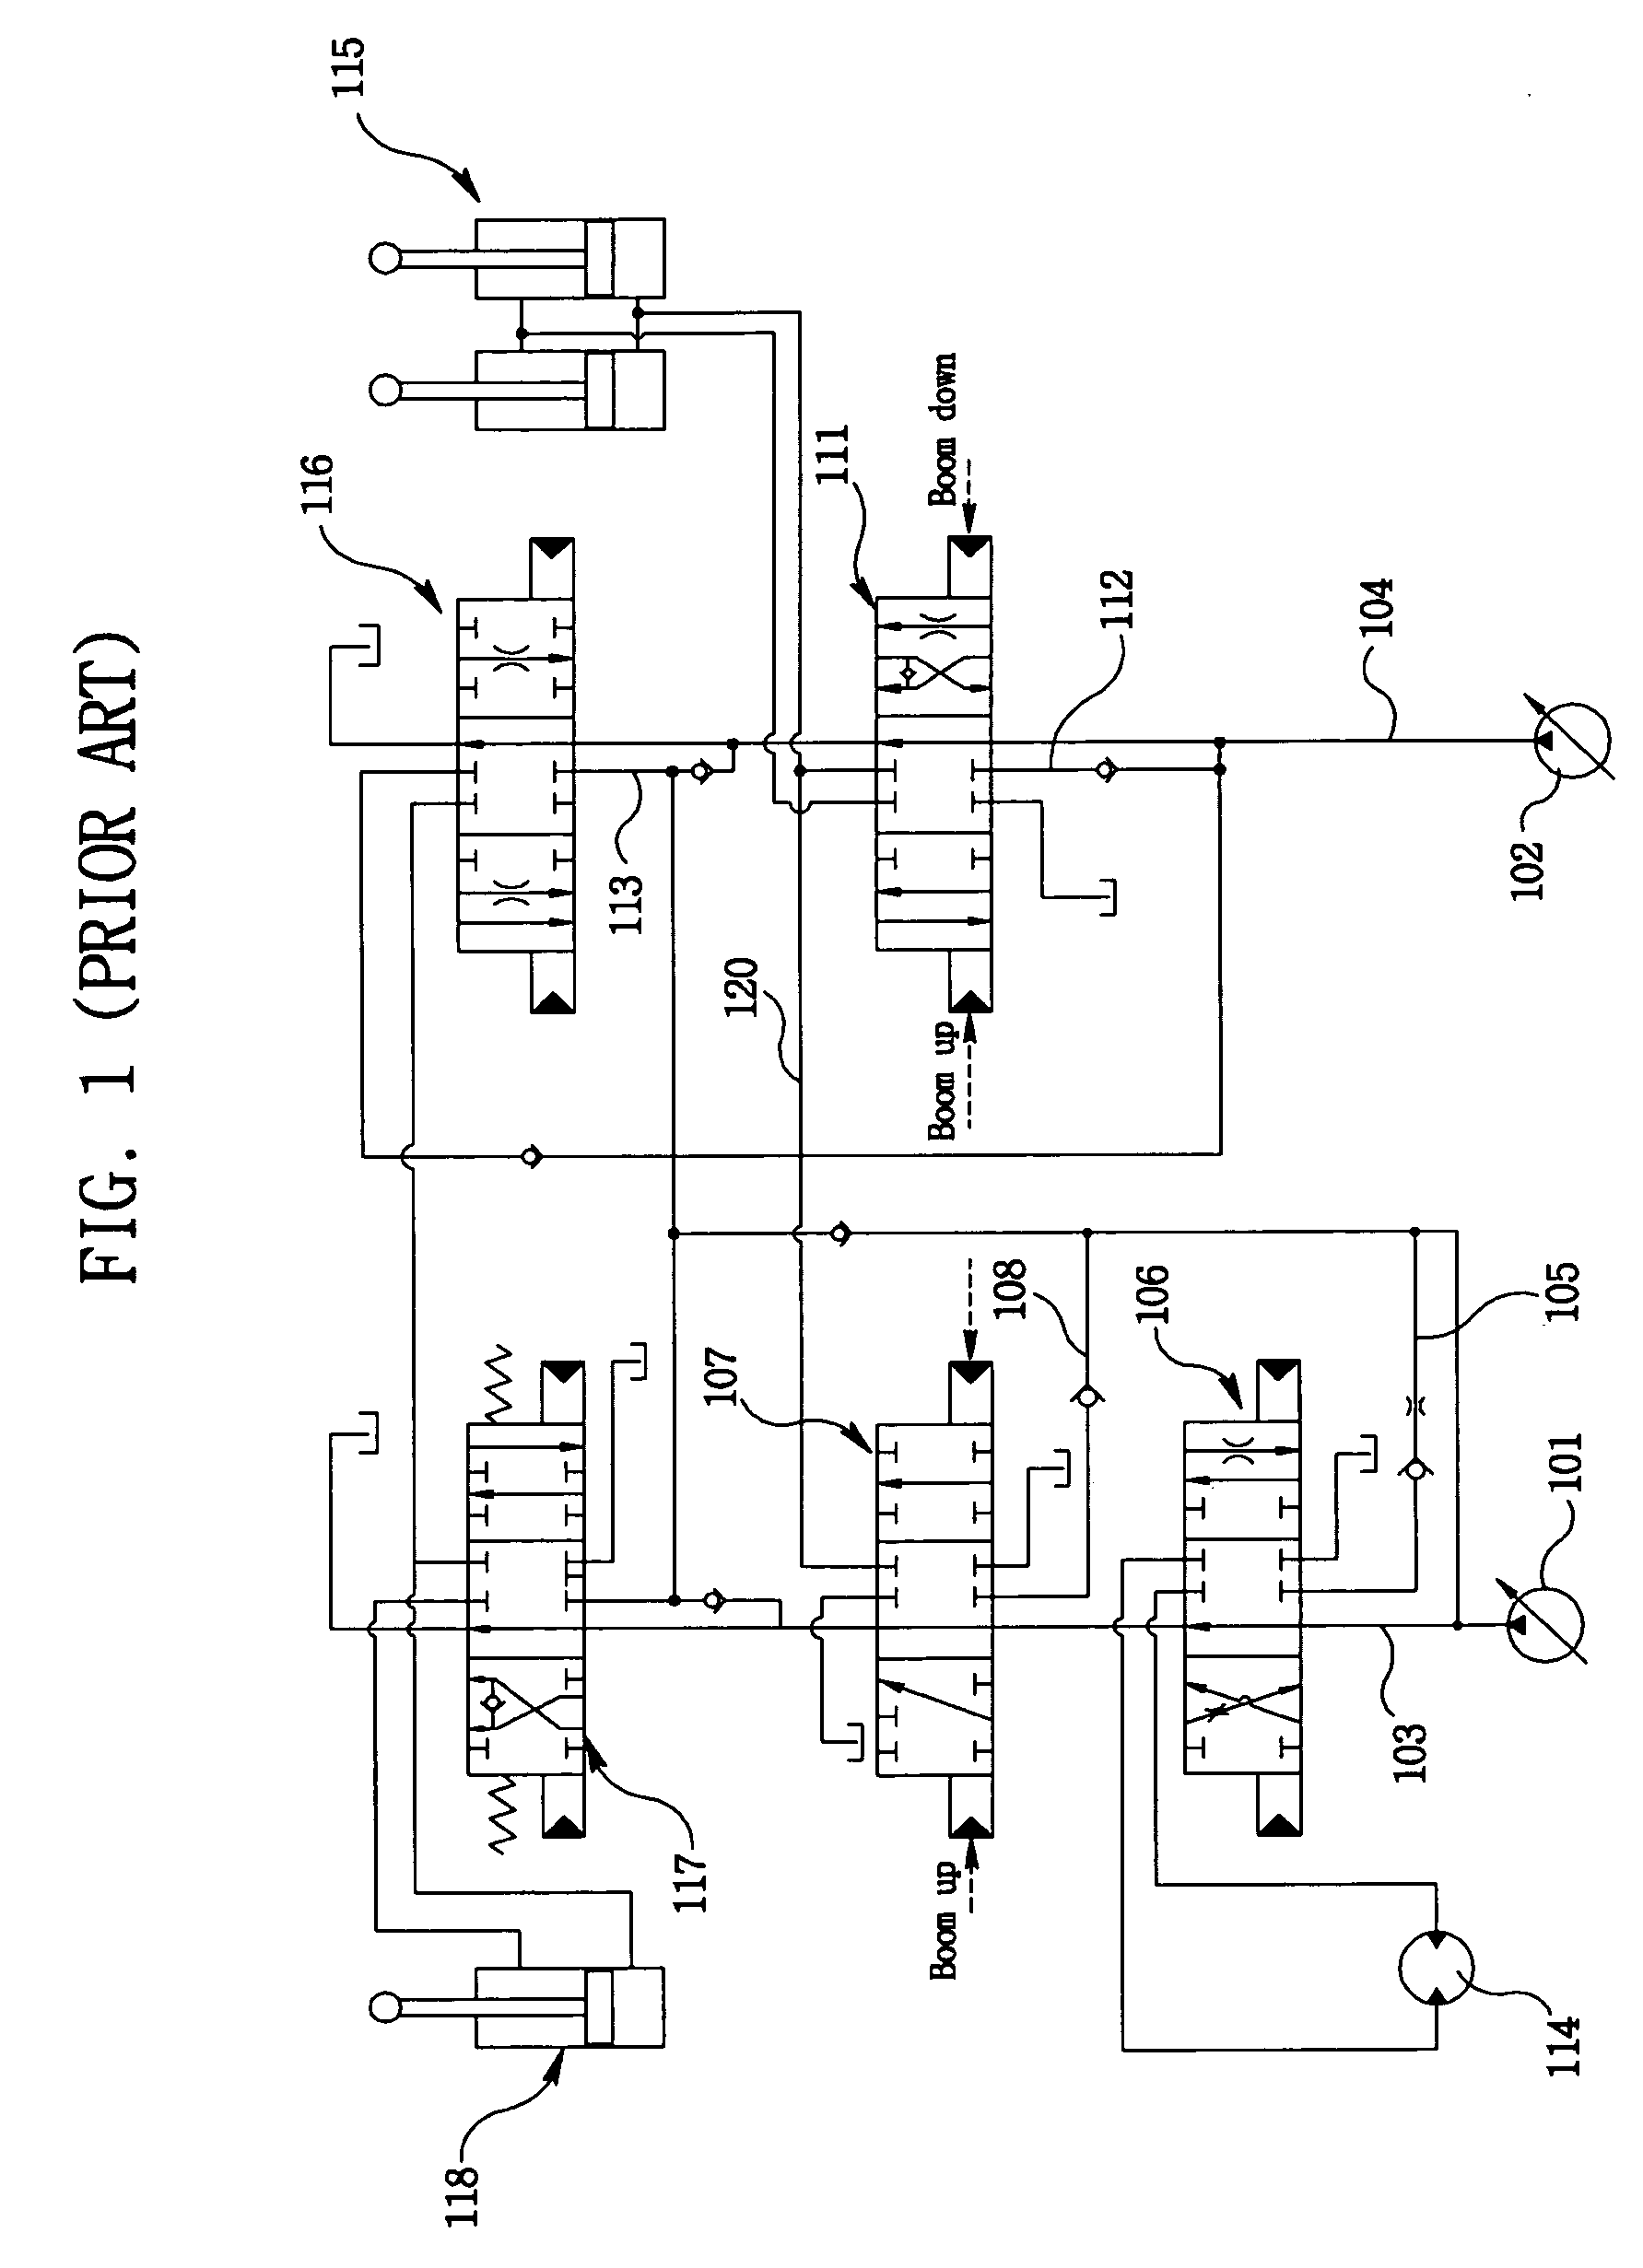 Hydraulic control device of an excavator with improved loading performance on a slope